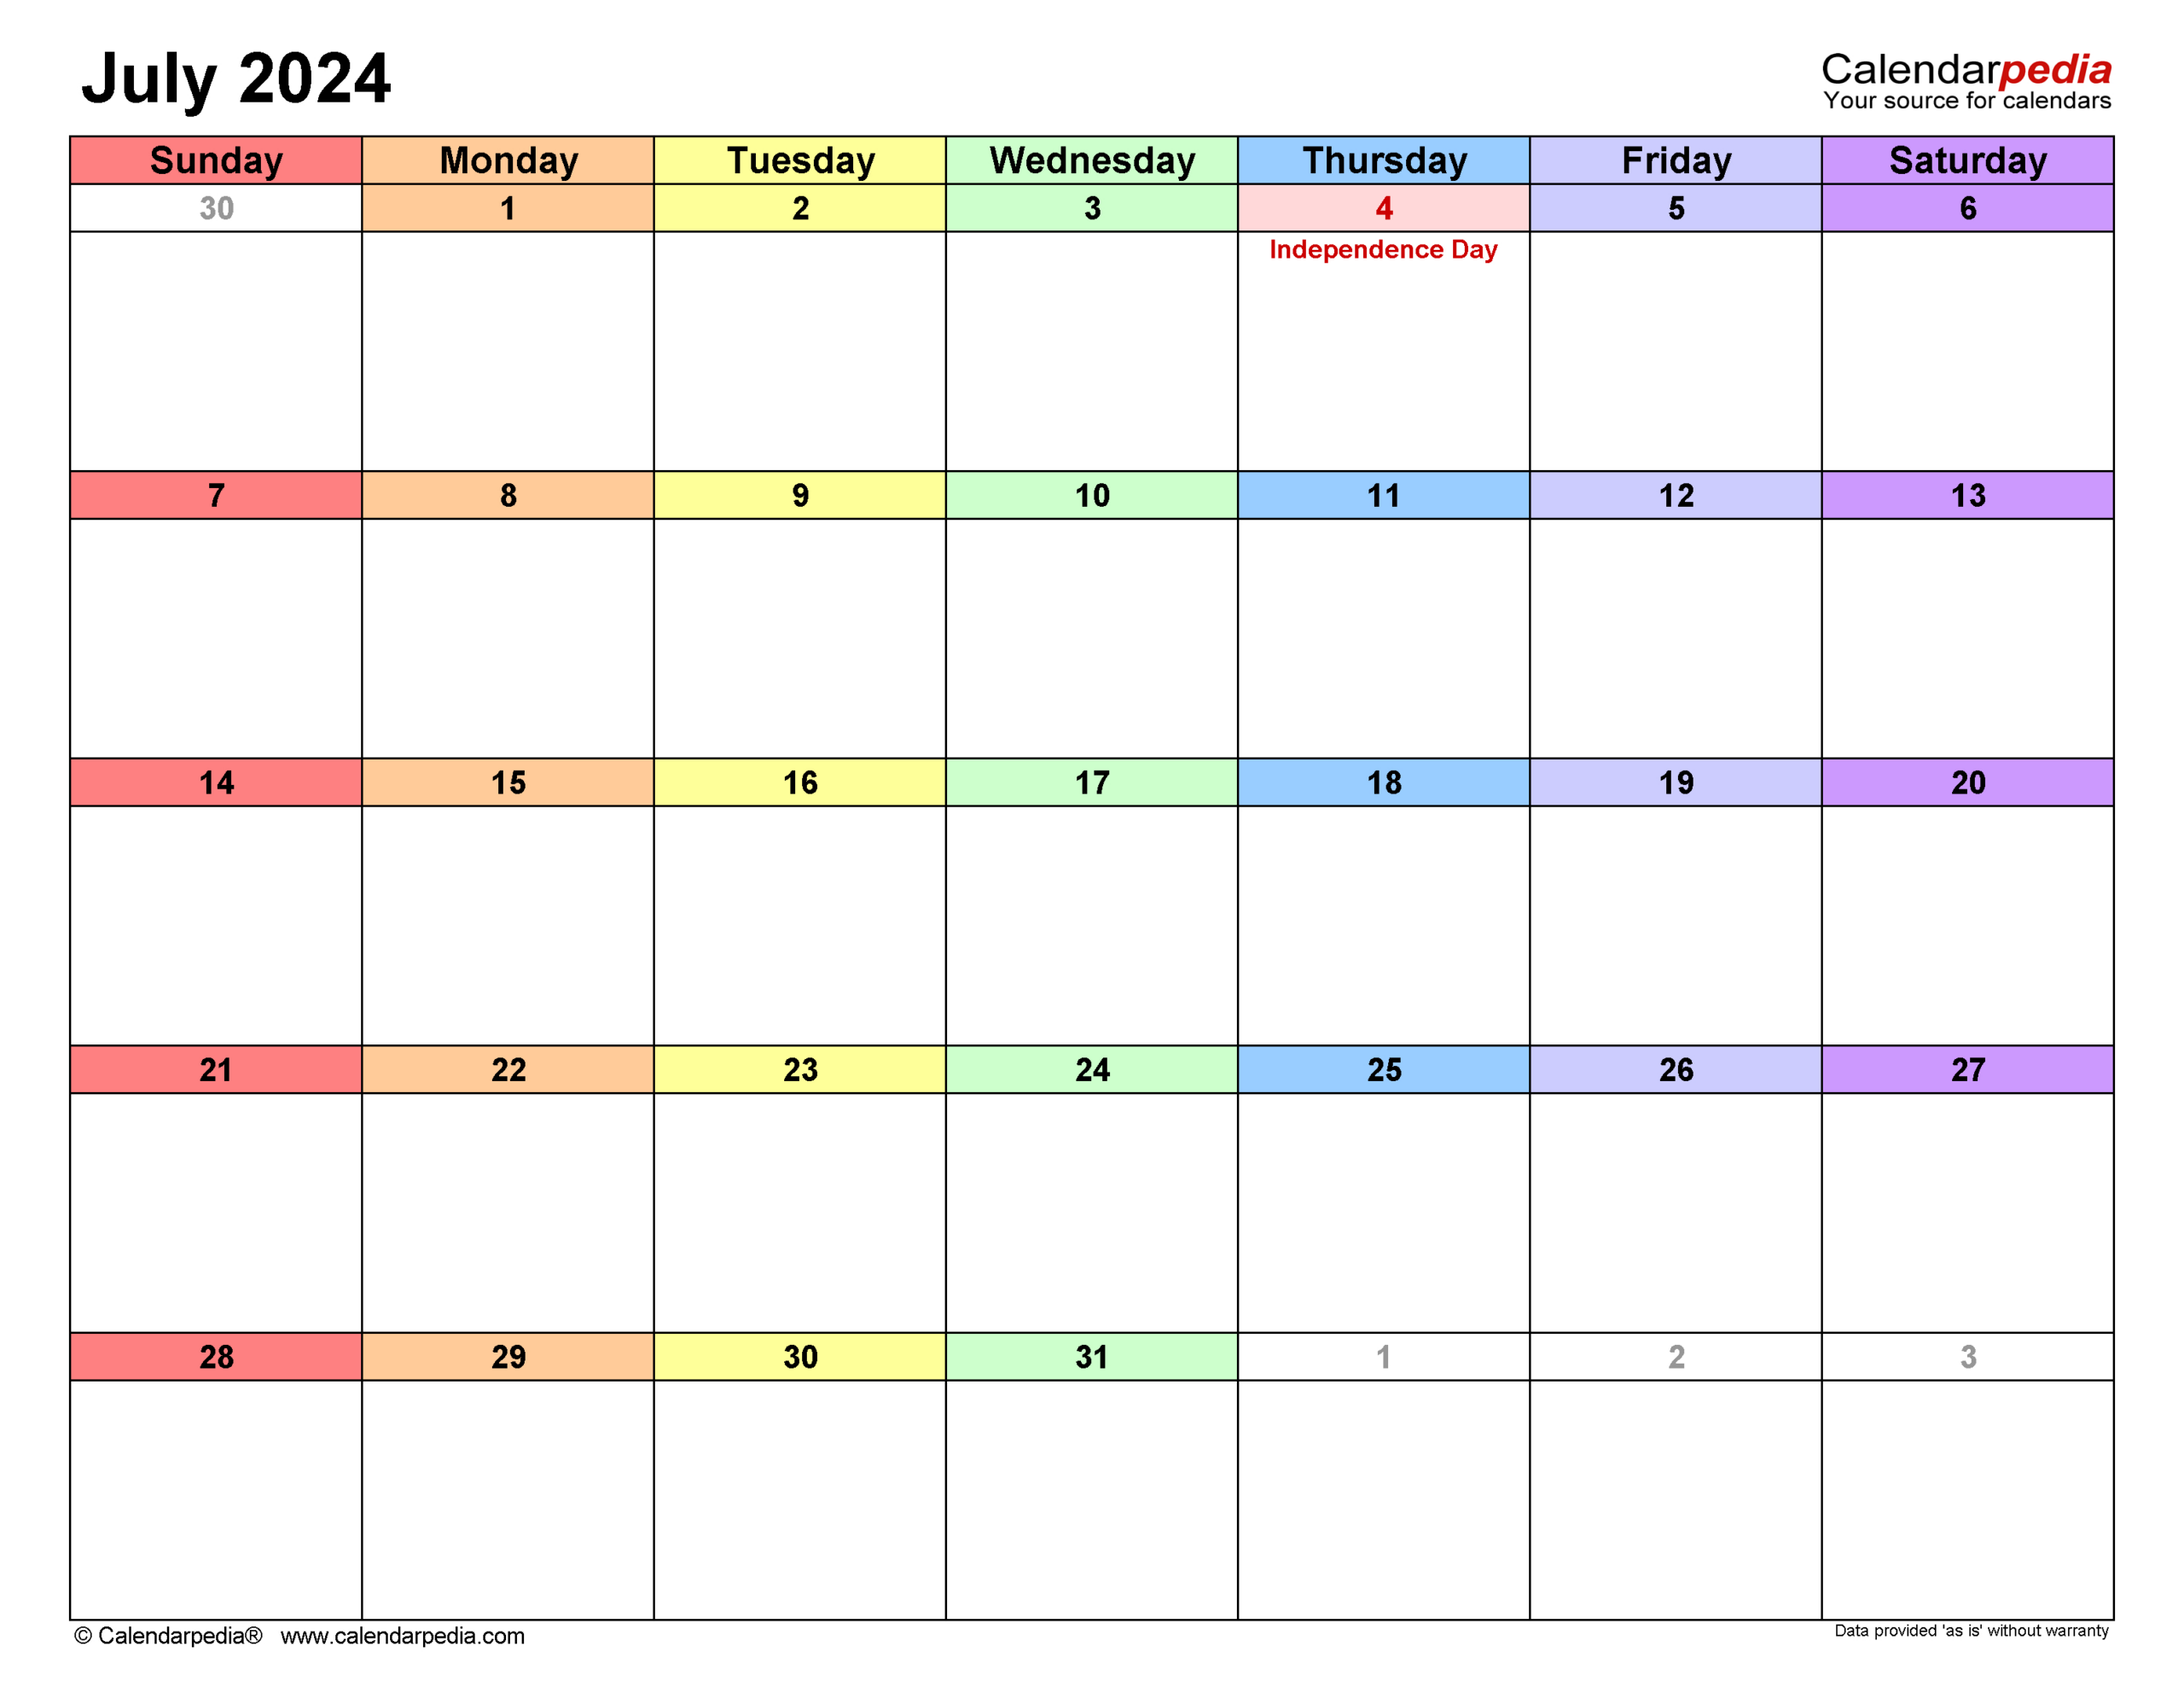 July 2024 Calendar | Templates For Word, Excel And Pdf with July 2024 Calendar Fillable